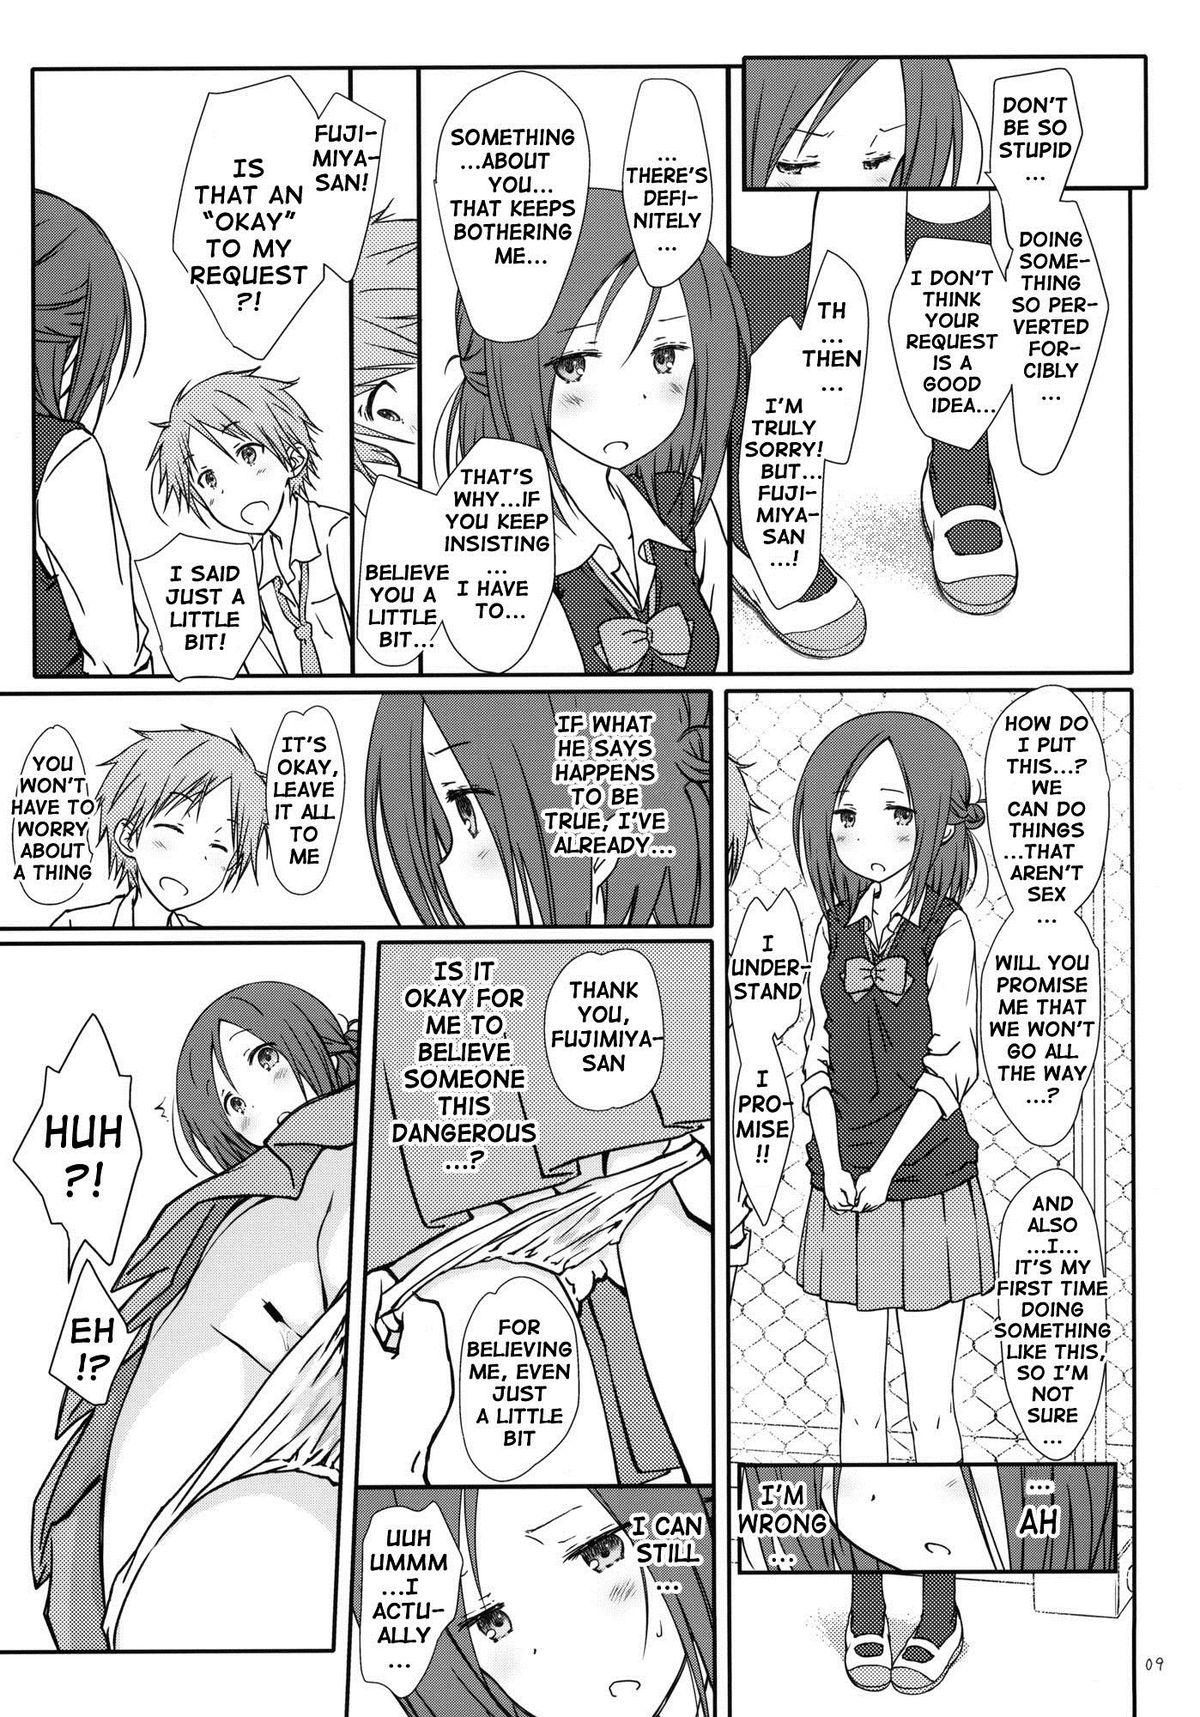 Edging "Tomodachi to no Sex." | Sex With Friends - One week friends Analfuck - Page 8